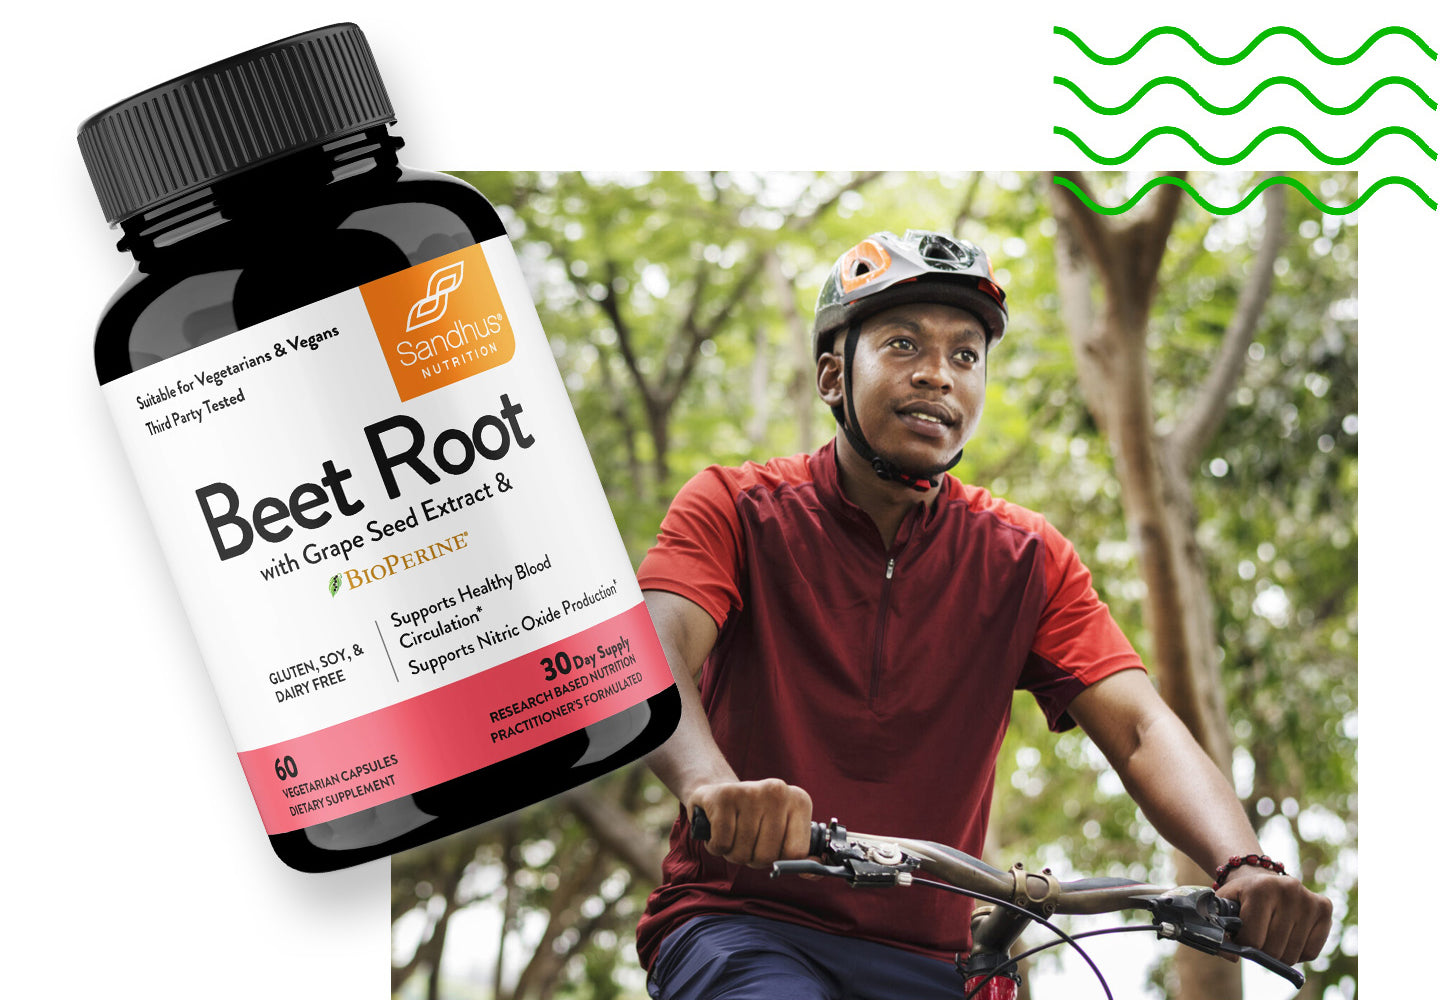 beetroot-with-grape-seed-extract-bioperine